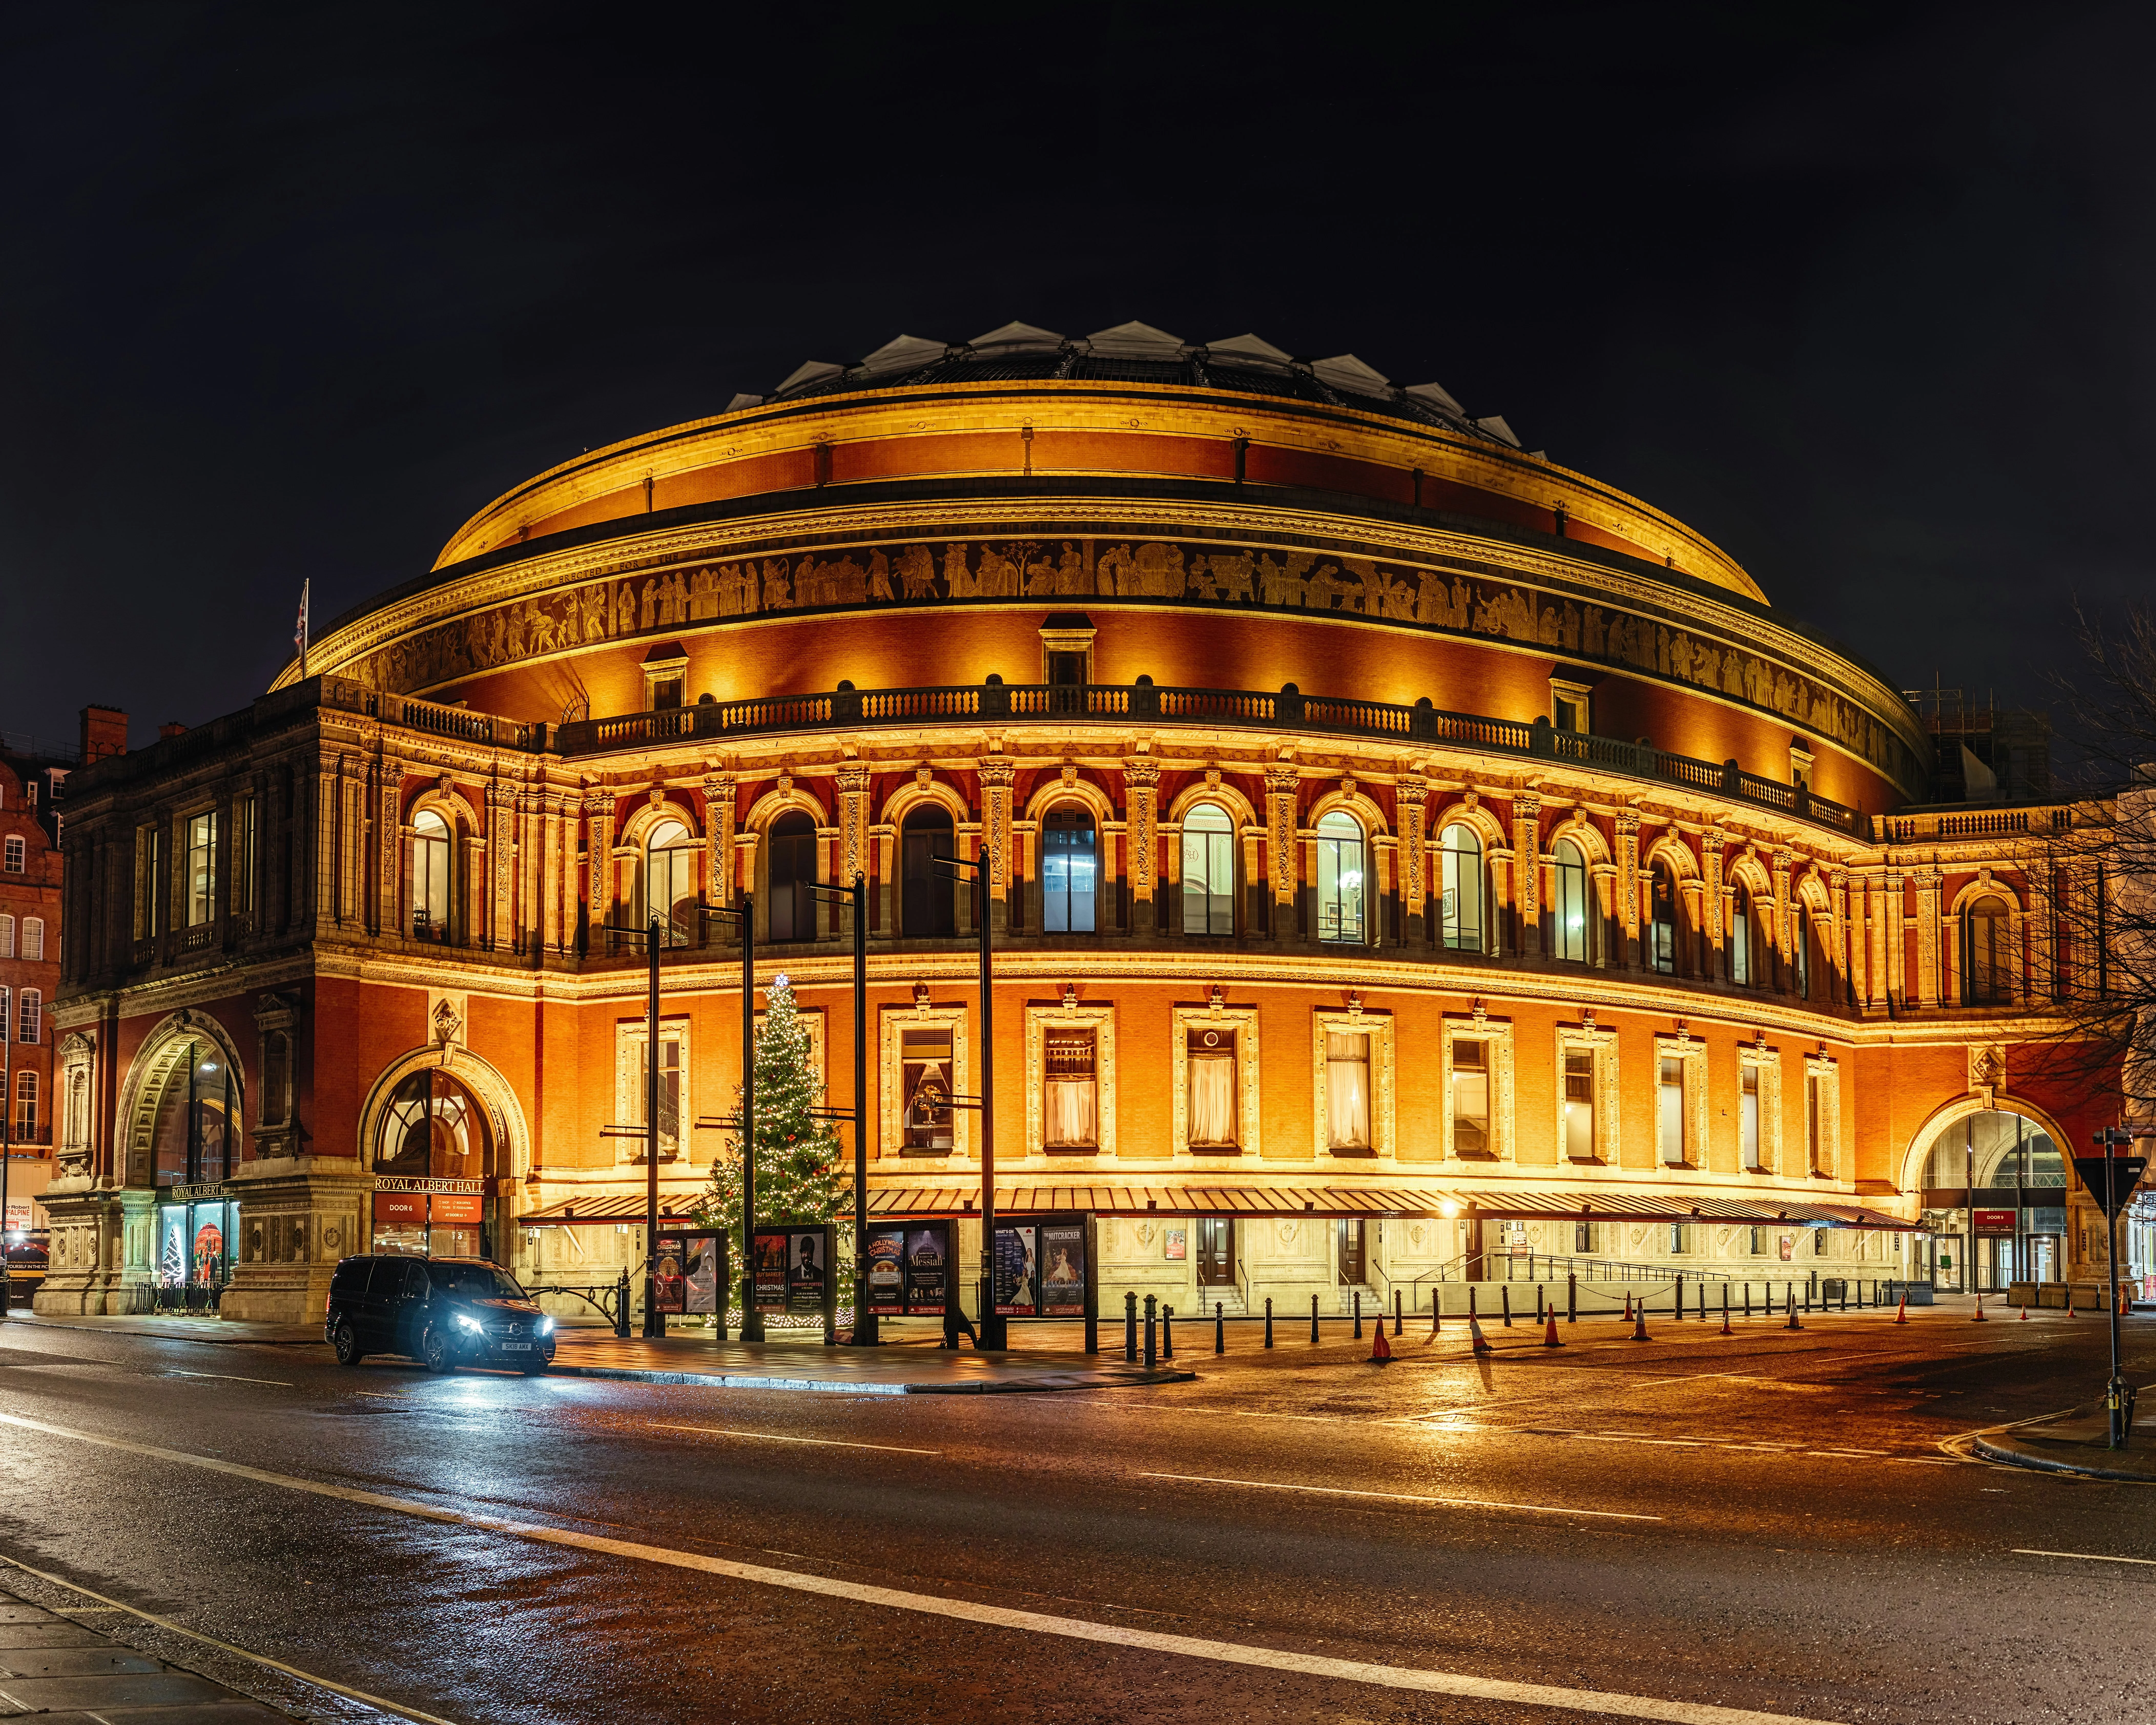 A large building with a dome roof, with the Royal Albert Hall in the background.